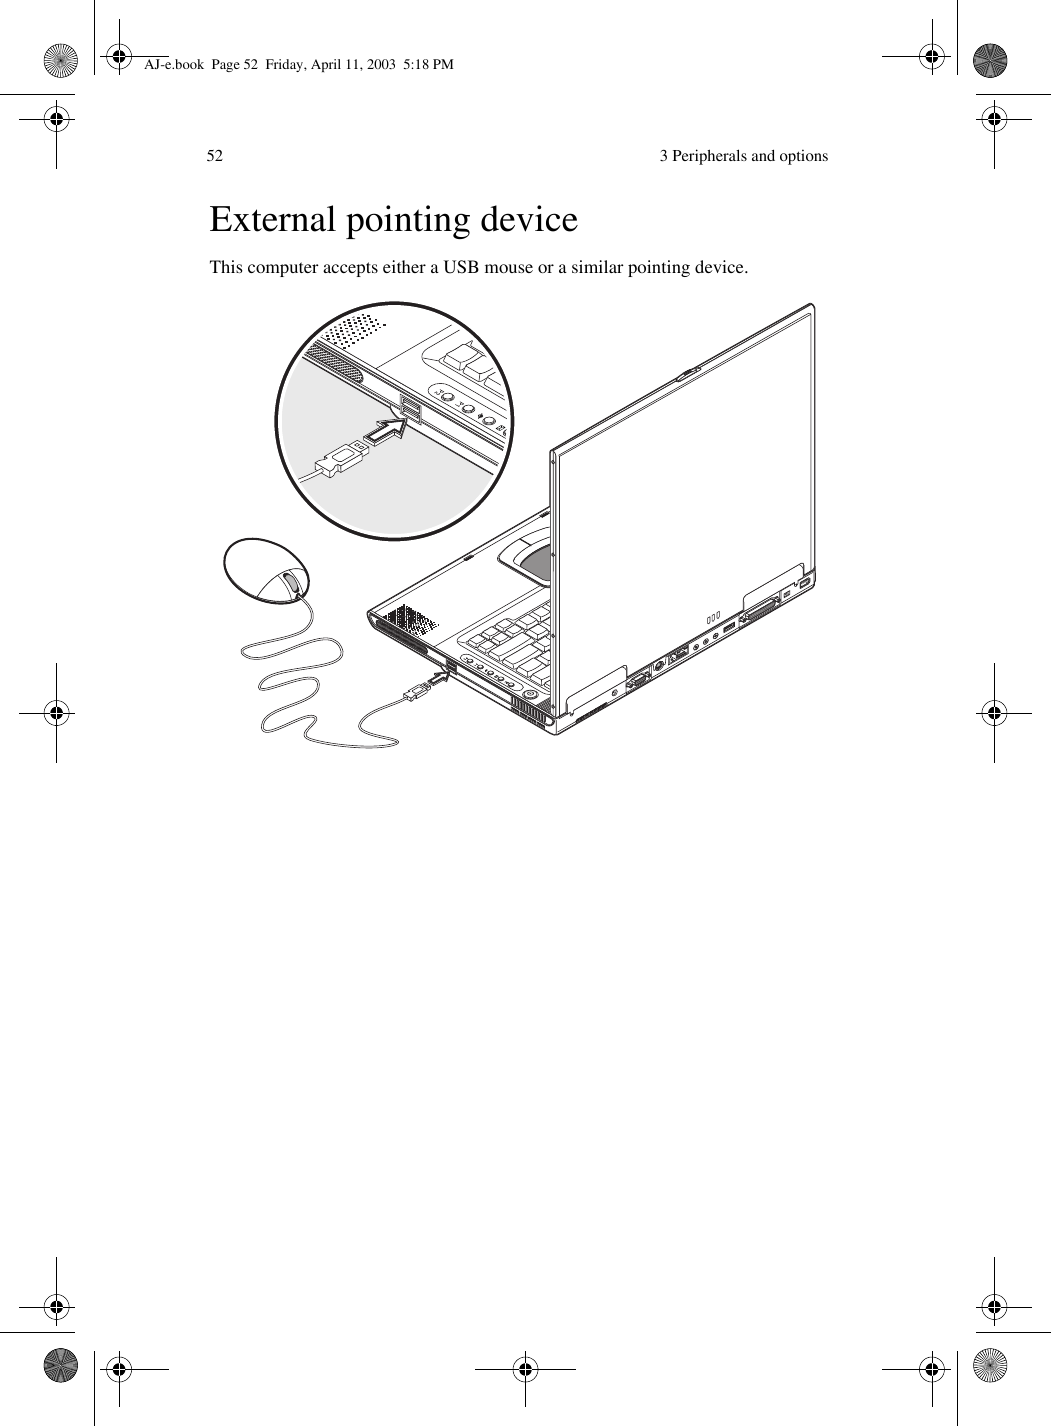  3 Peripherals and options52External pointing deviceThis computer accepts either a USB mouse or a similar pointing device.  AJ-e.book  Page 52  Friday, April 11, 2003  5:18 PM